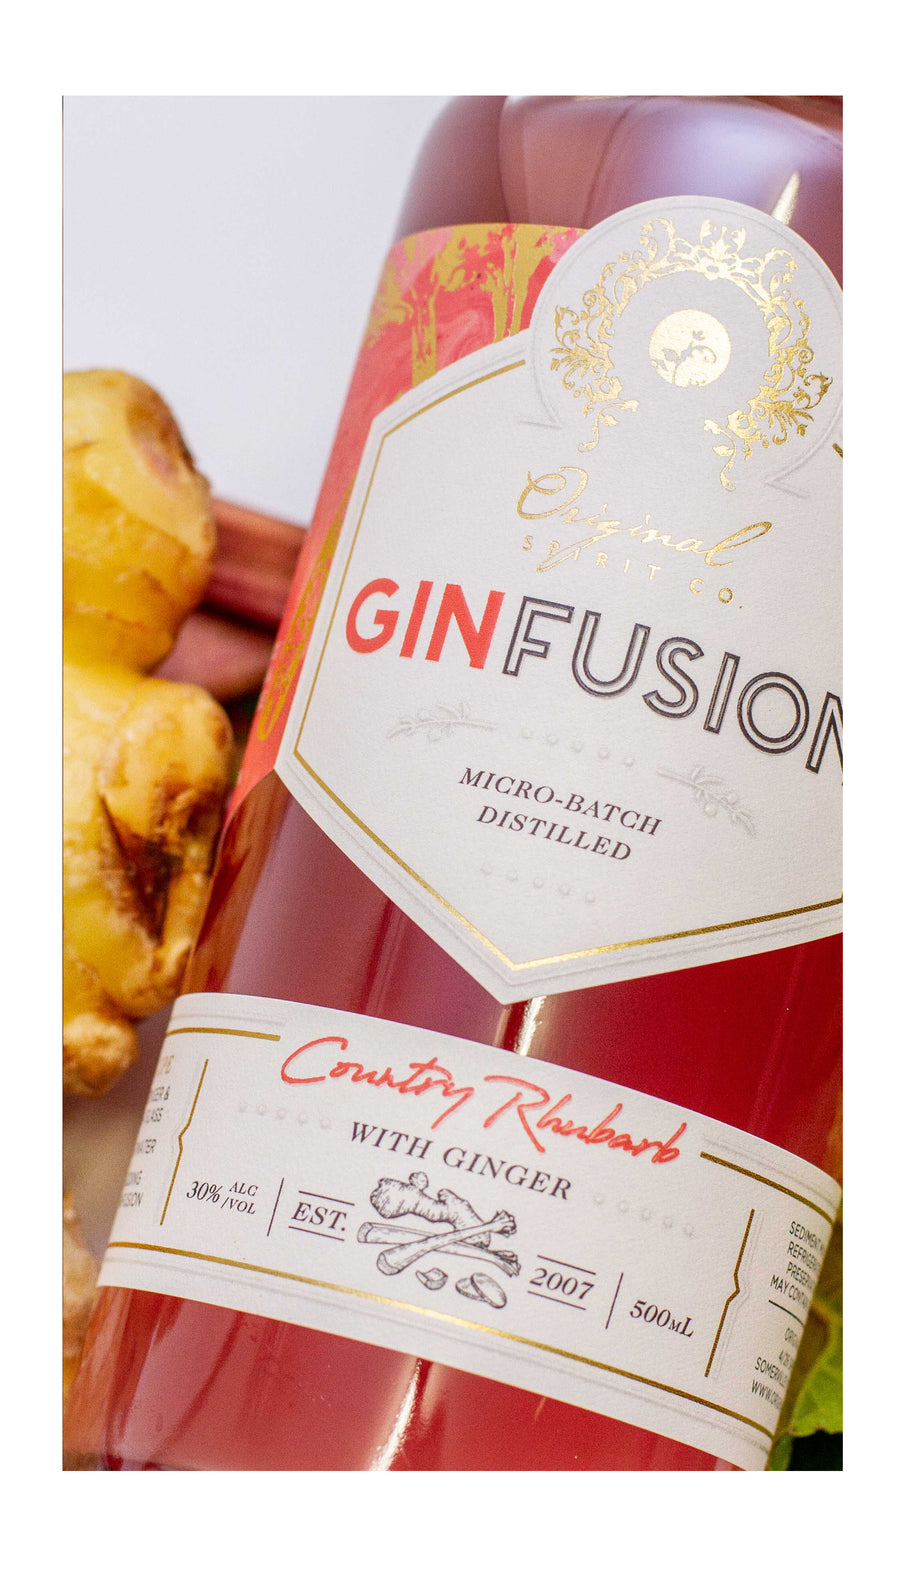 Rhubarb and Ginger Gin from the Mornington Peninsula